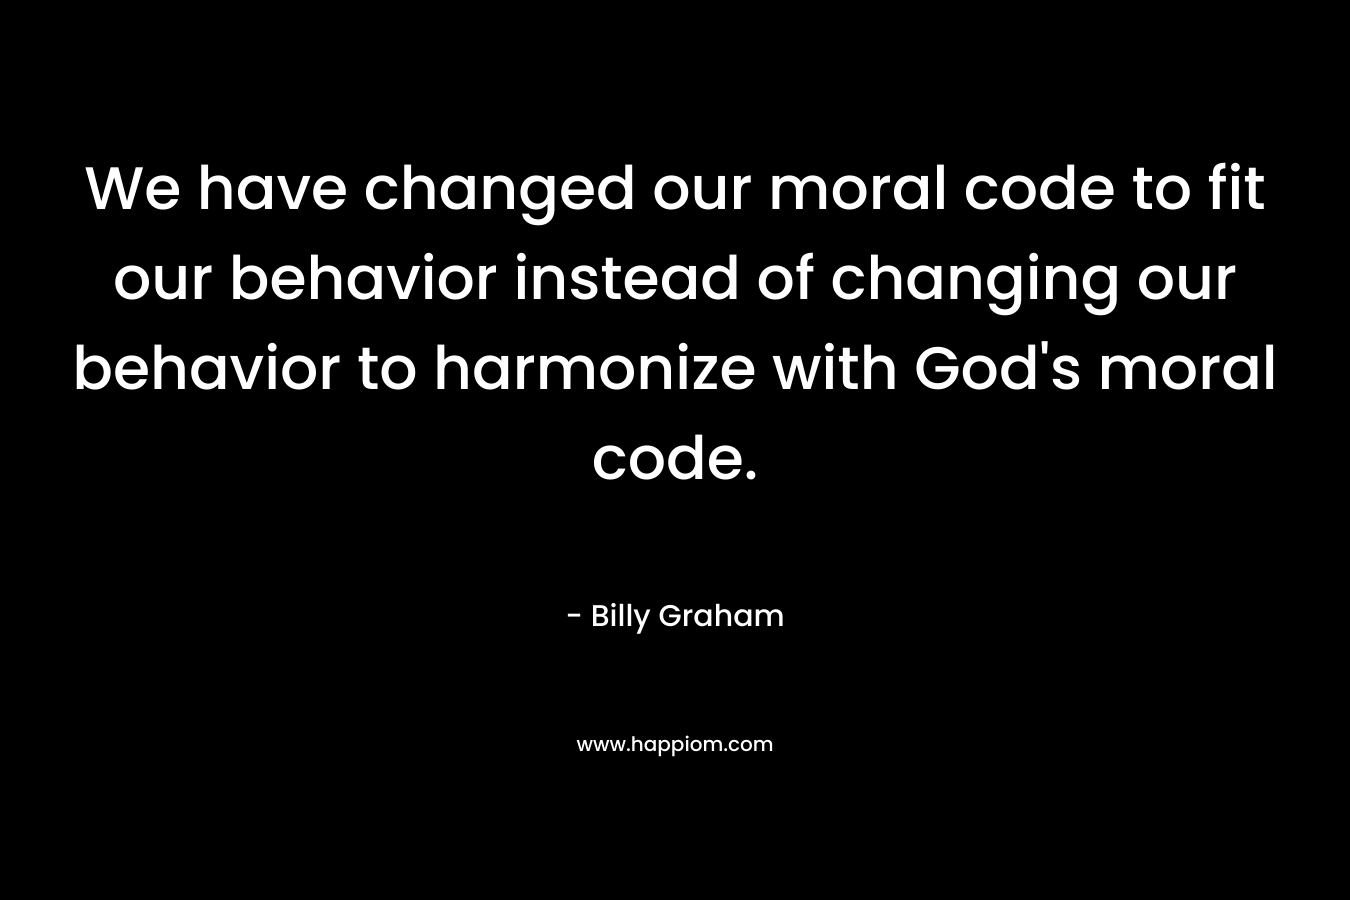 We have changed our moral code to fit our behavior instead of changing our behavior to harmonize with God’s moral code. – Billy Graham